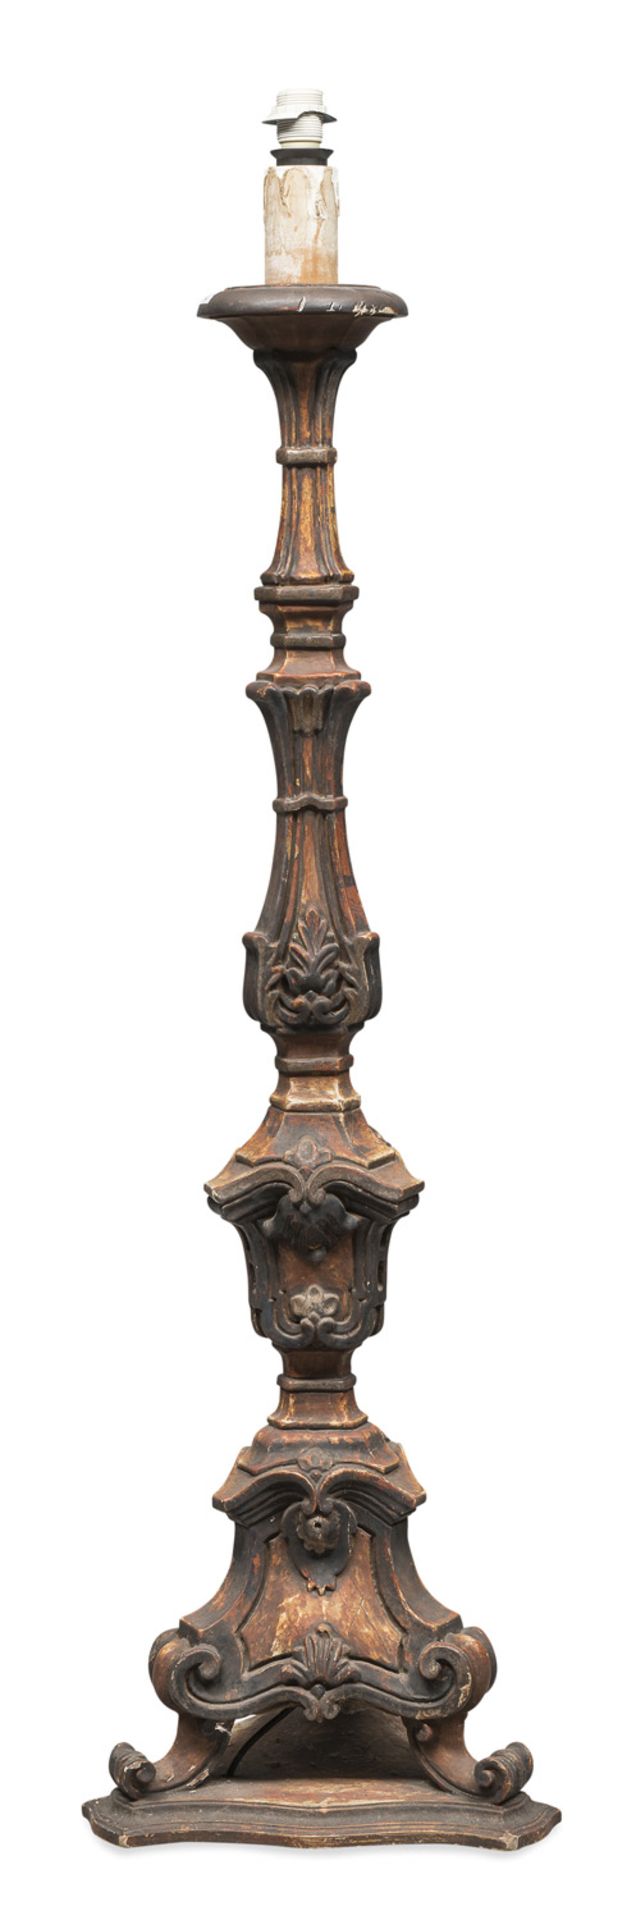 LACQUERED WOOD FLOOR LAMP 18TH CENTURY